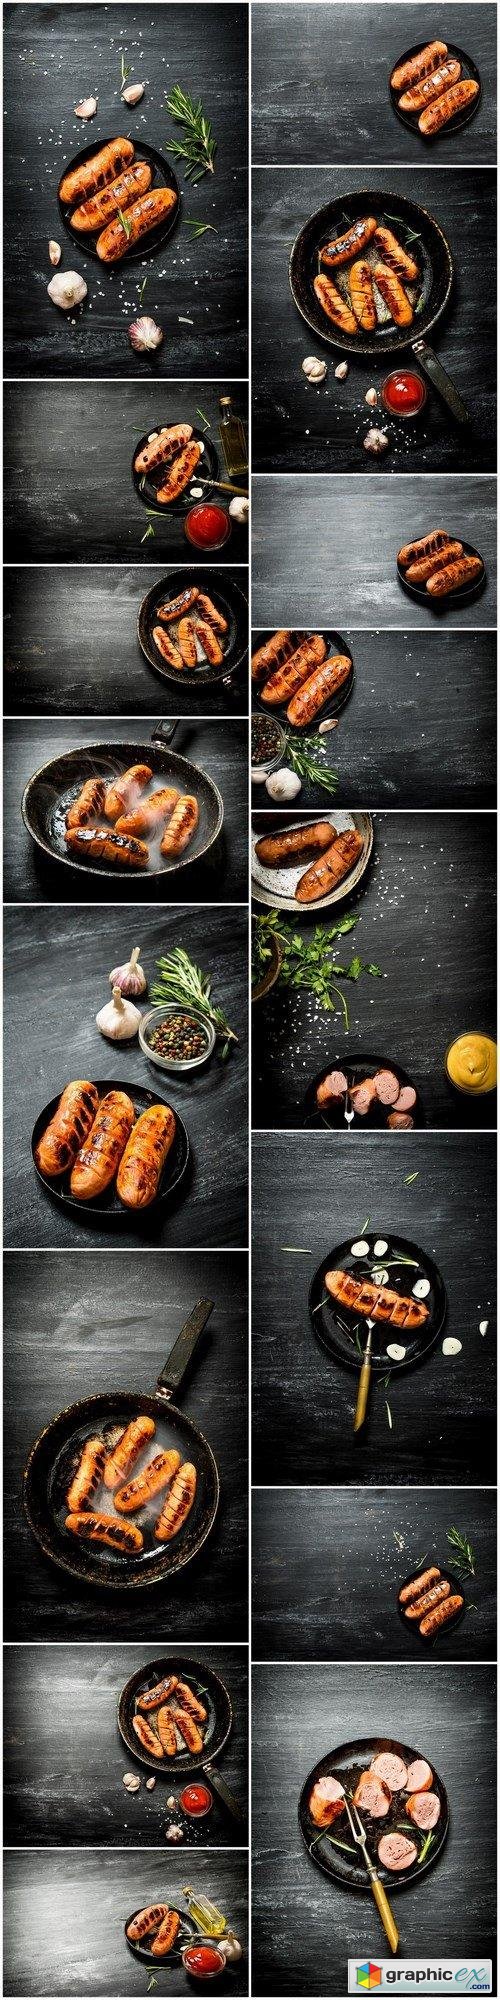 Fried Grilled Sausages with Spices - 16xUHQ JPEG